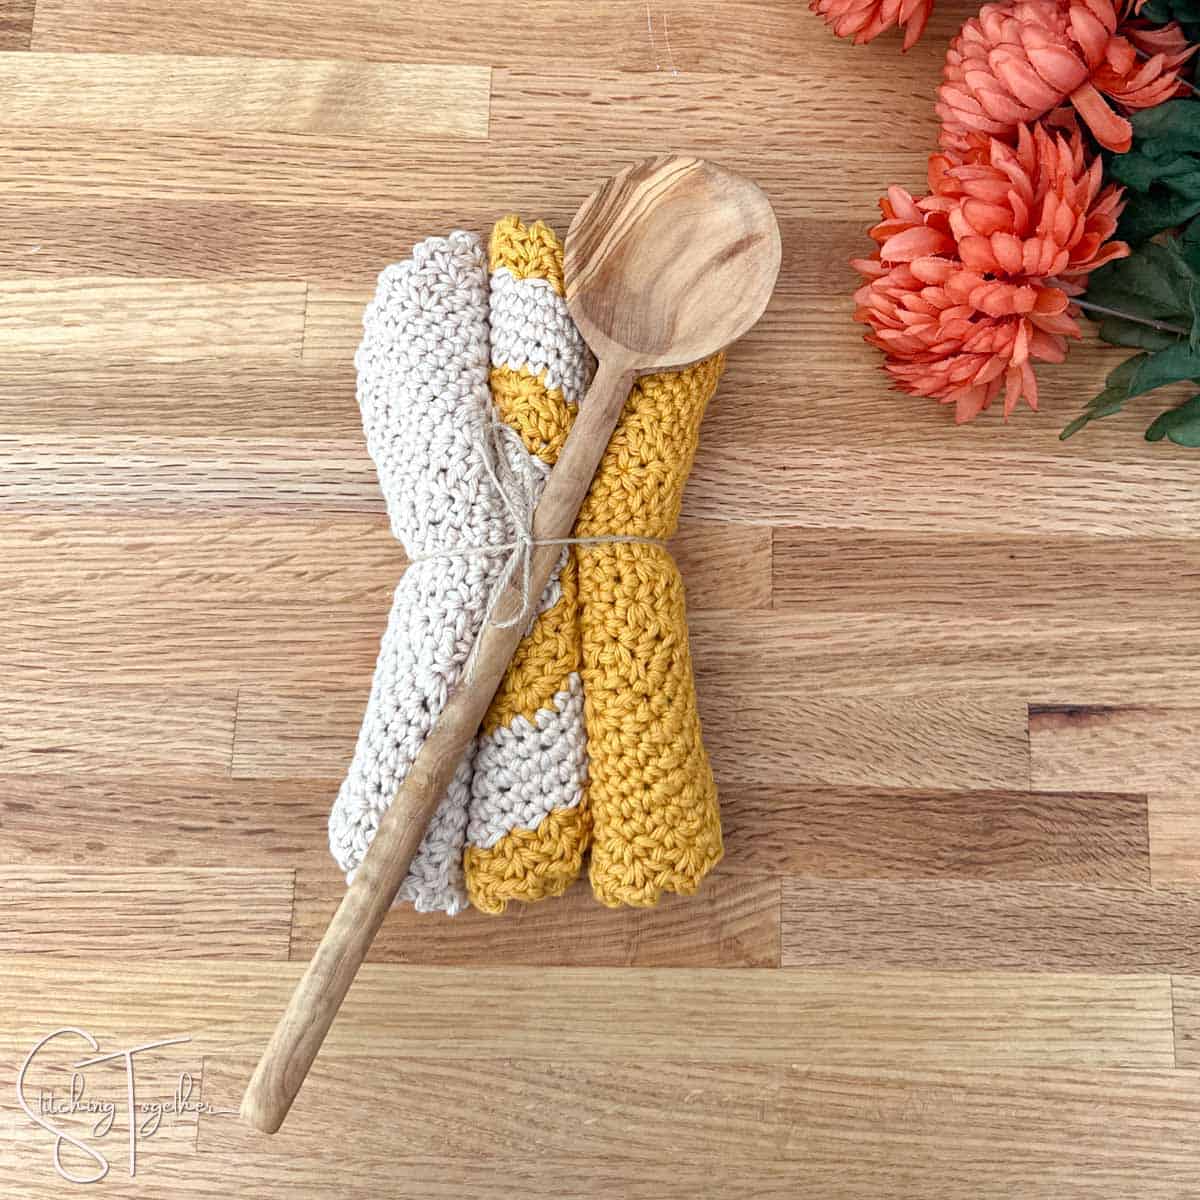 three dishcloths rolled up and tied with jute with a wooden spoon on top